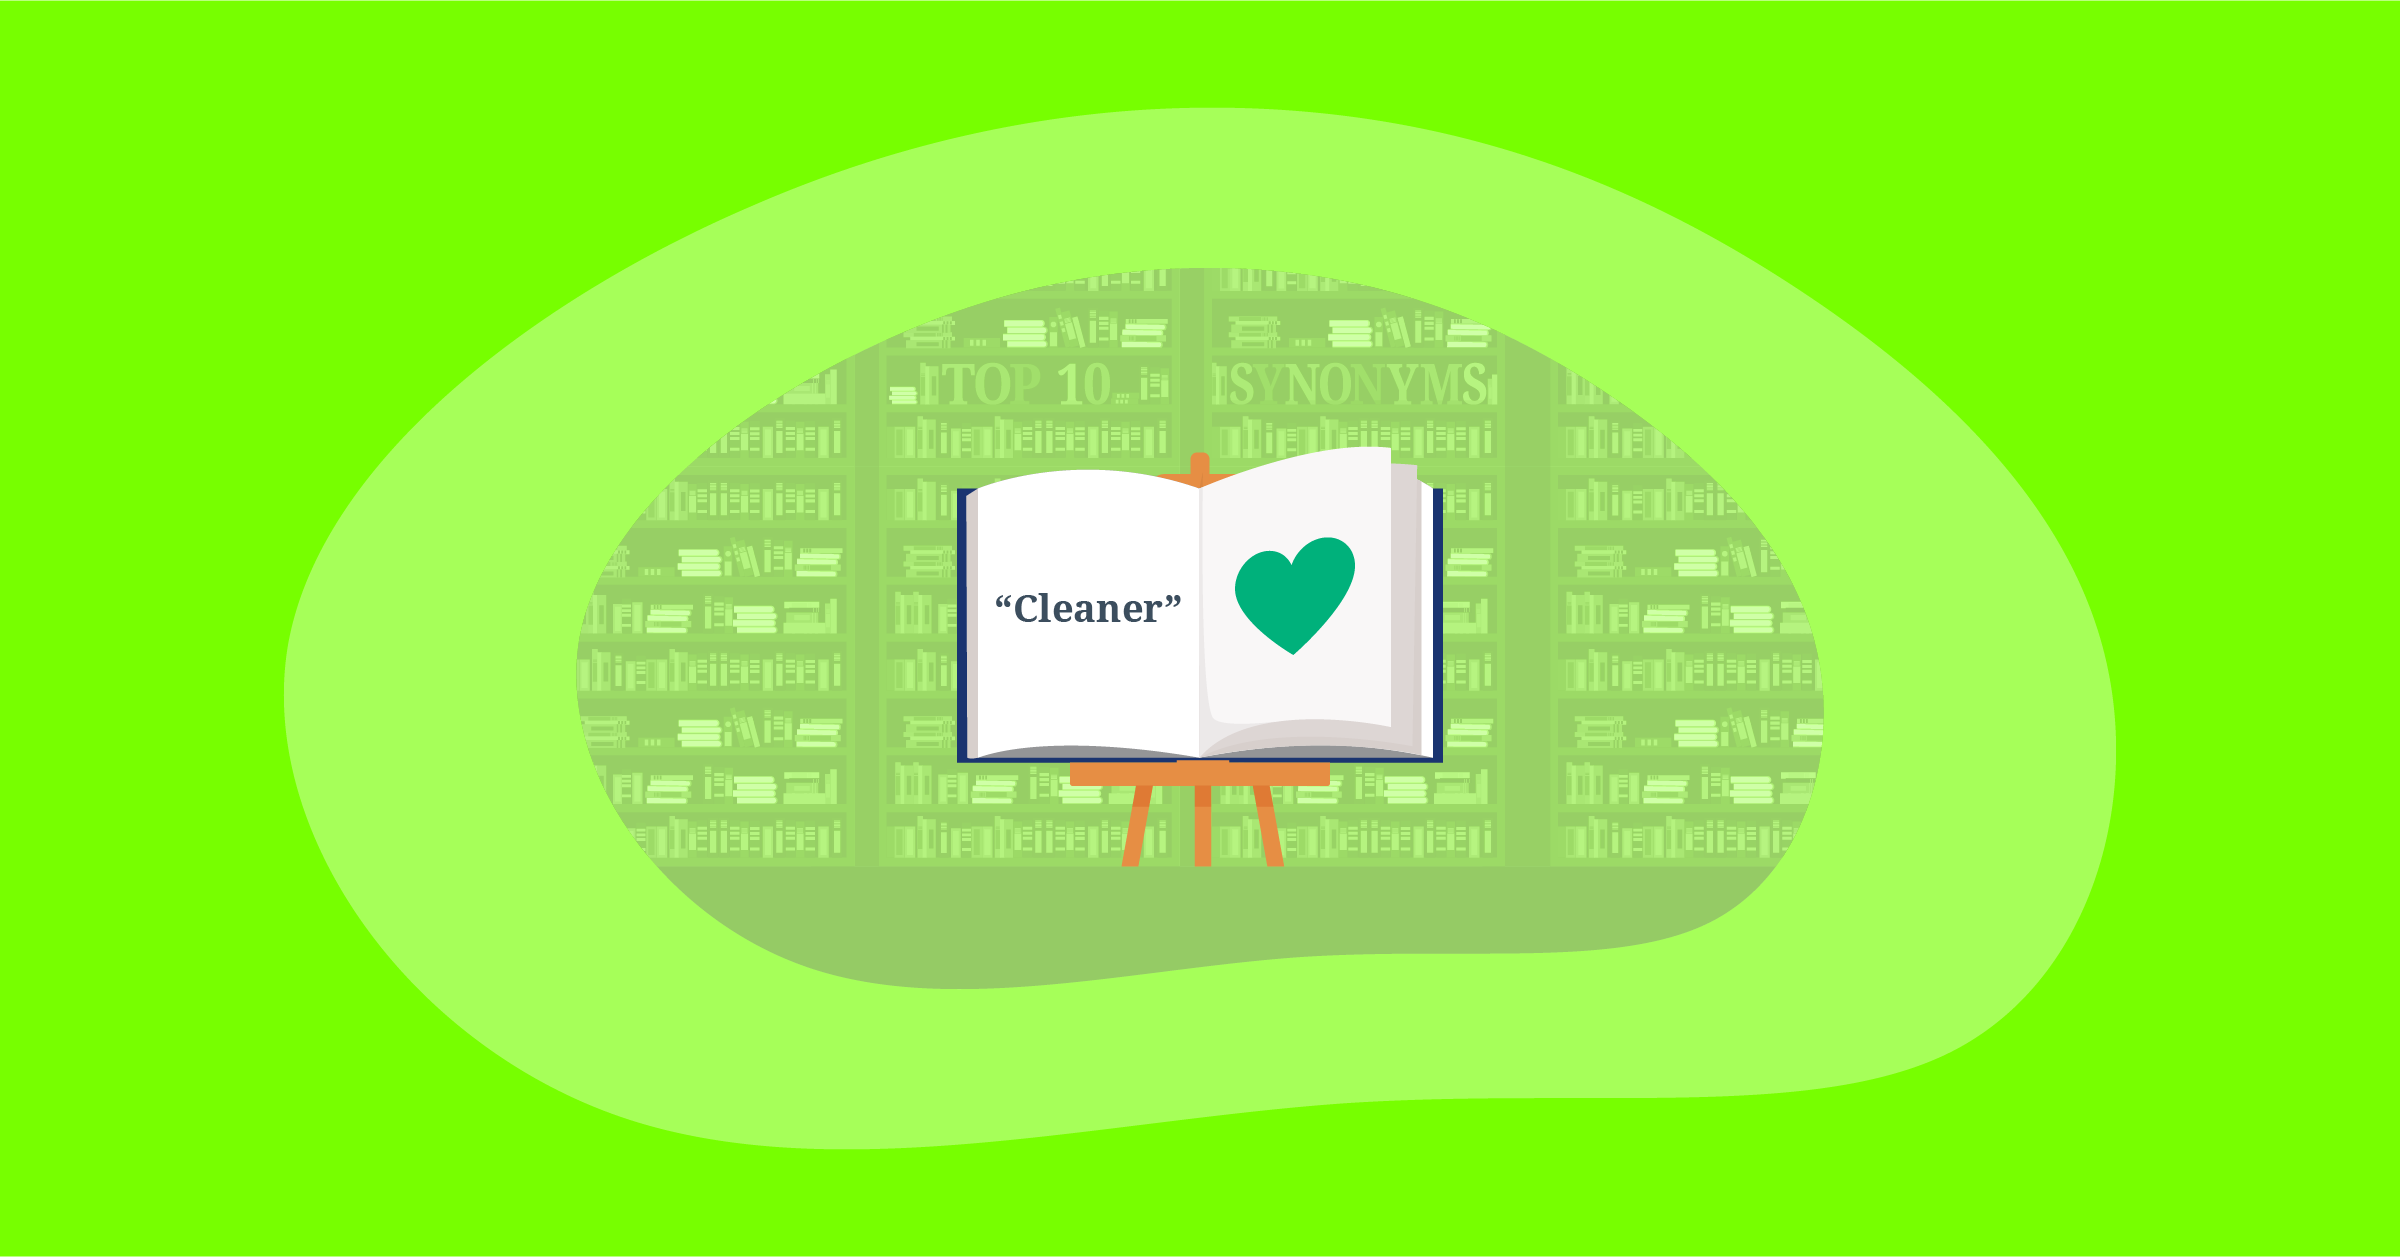 Illustration for Top 10 Positive & Impactful Synonyms for “Cleaner”